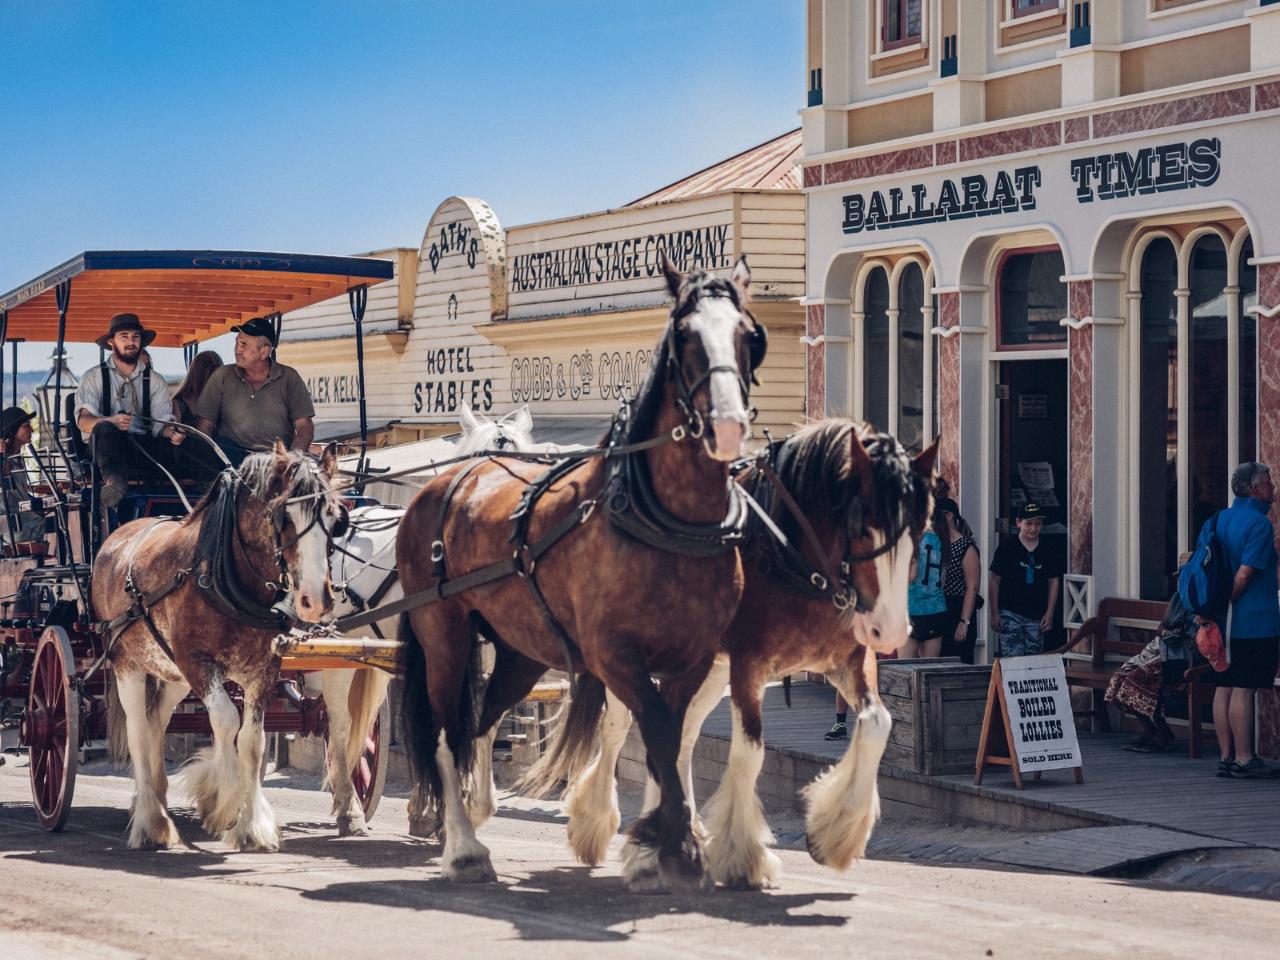 Sovereign Hill (Gold Trail) Experience